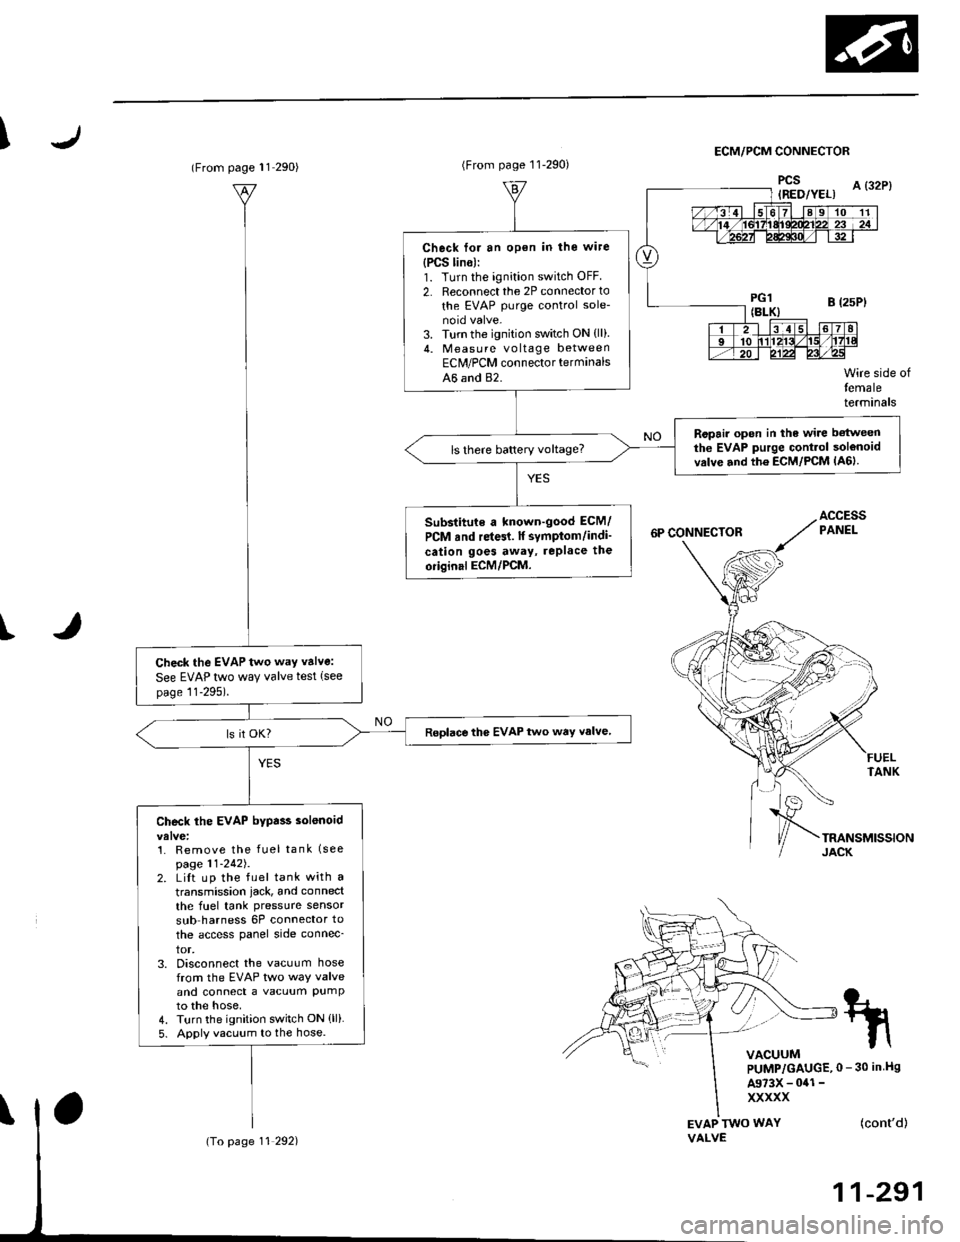 HONDA CIVIC 1996 6.G Service Manual IECM/PCM CONNECTOR
I
EVAP TWO WAYVALVE
Wire side oftemaleterminals
FUELTANK
(contd)
11-291
tn
VACUUMPUMP/GAUGE,0 - 30 in Hs
A973X - 041 -
xxxxx
(From page l1 290)
Check the EVAP two way valve:
See EV